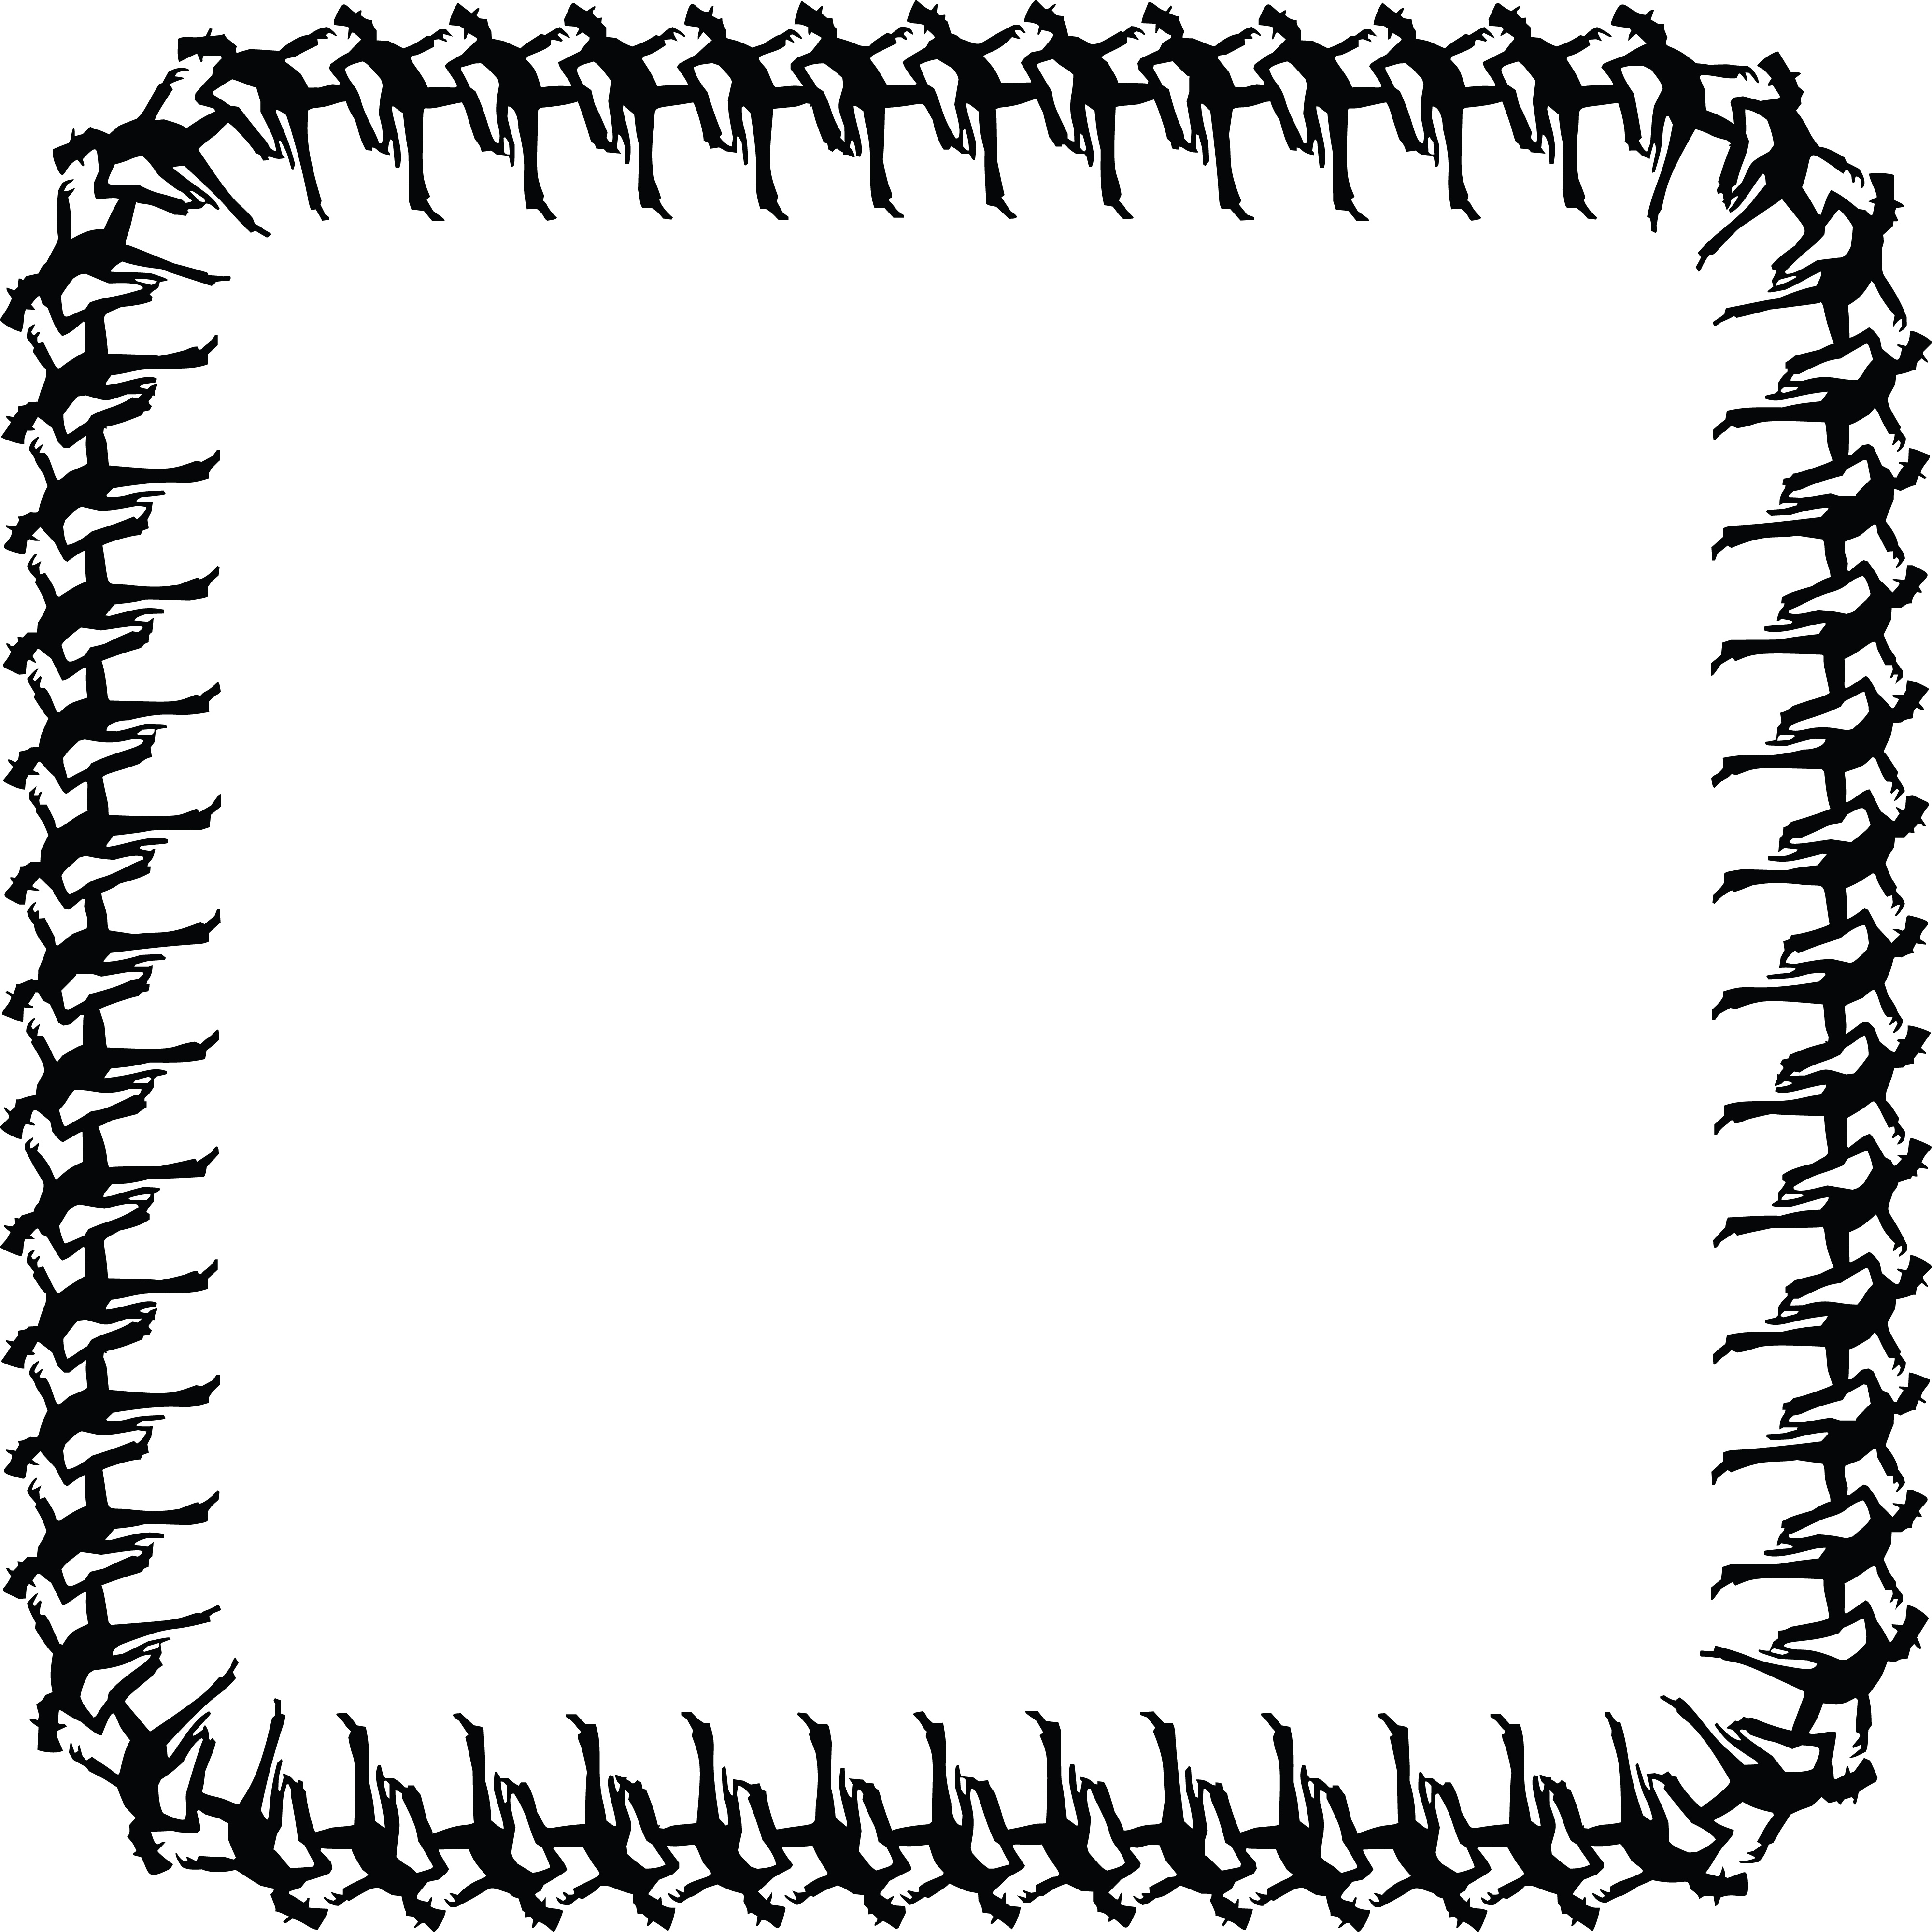 Square Border Cliparts | Free download on ClipArtMag